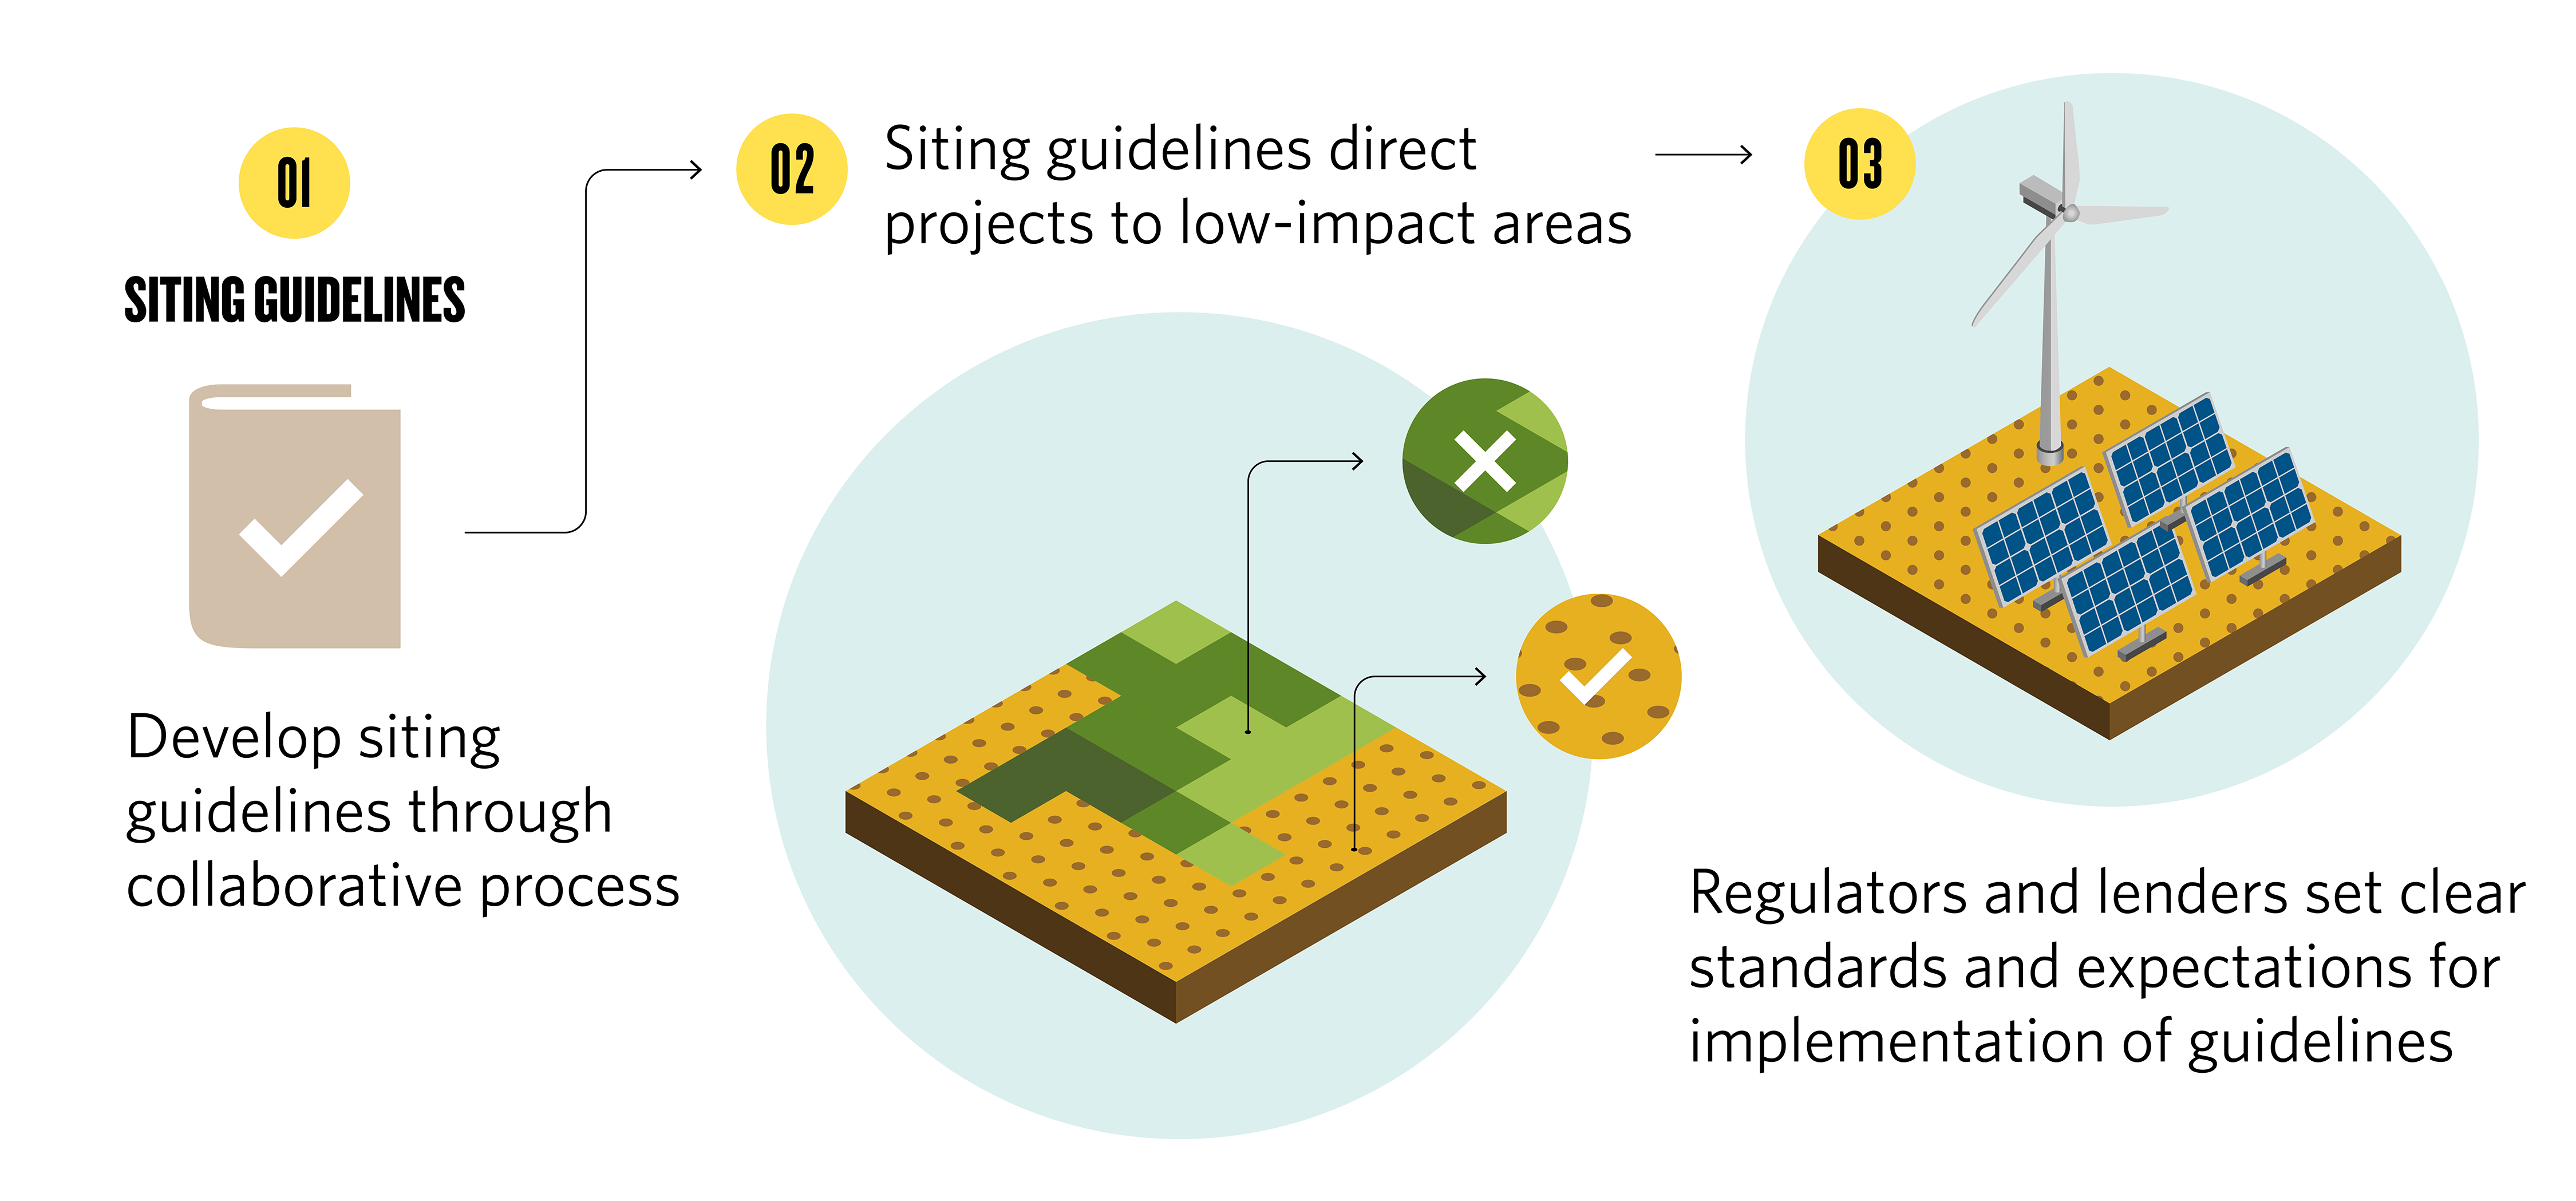 a flowchart showing siting guidelines directing energy projects to low-impact land, with regulators and lenders setting clear standards for adopting those guidelines.